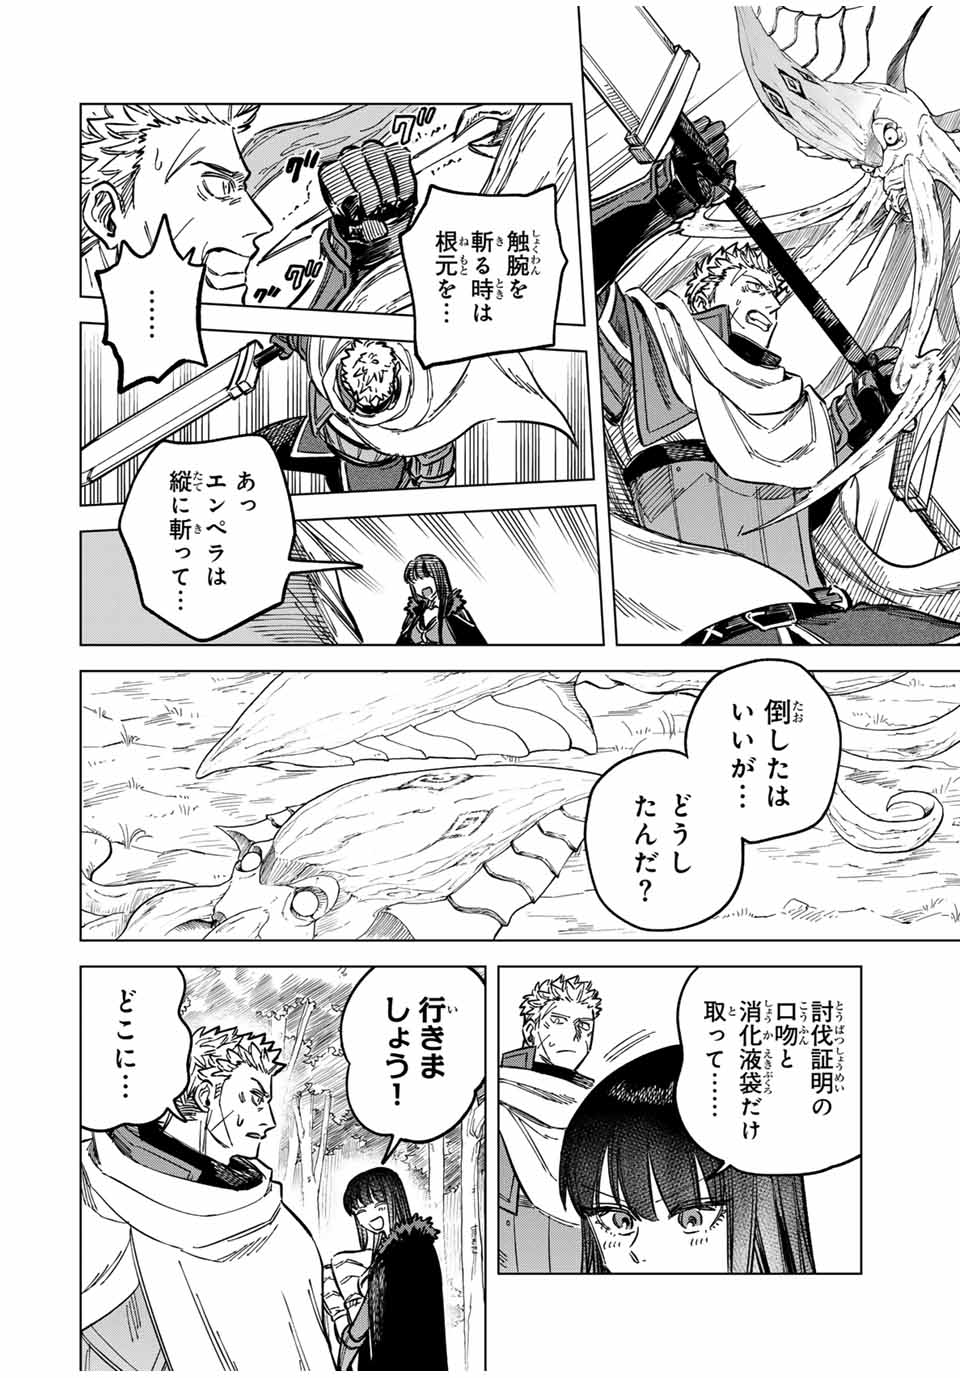 Witch and Mercenary 魔女と傭兵 第10話 - Page 10